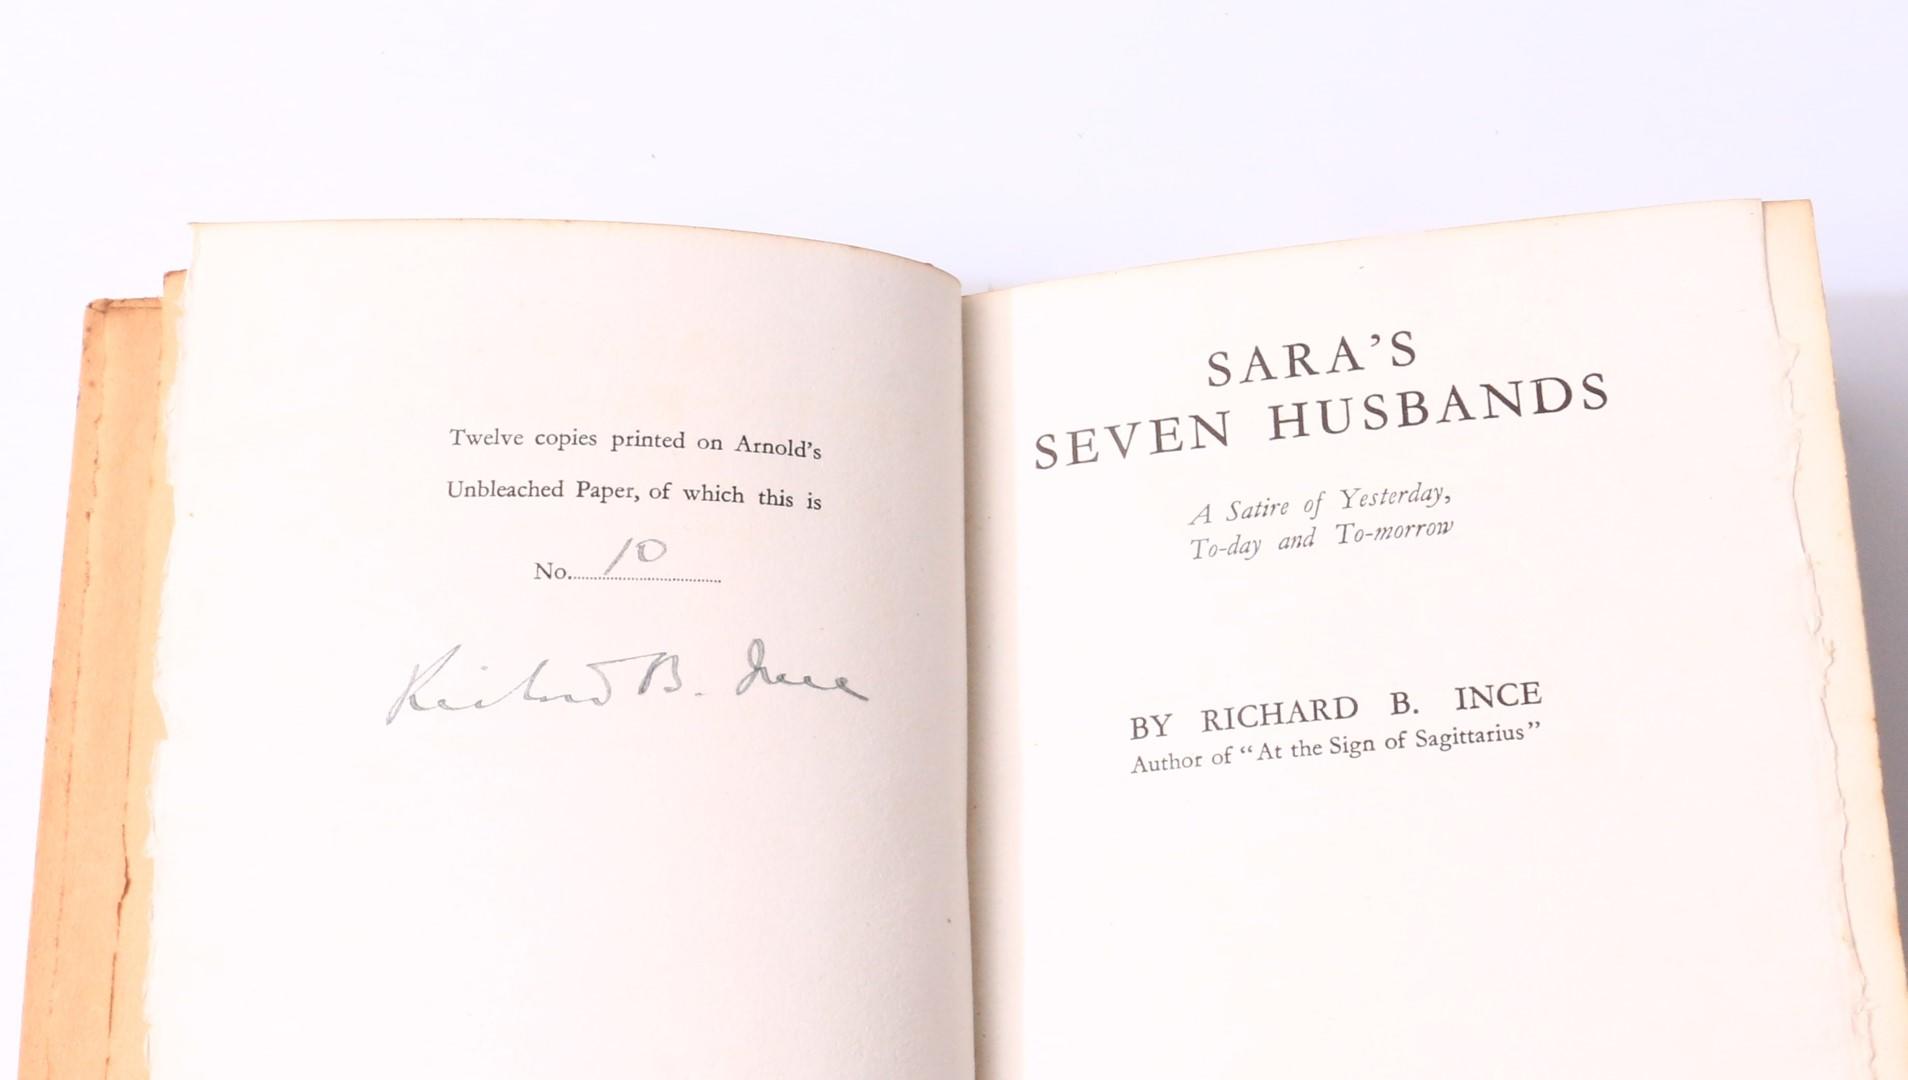 Richard B. Ince - Sara's Seven Husbands - George Roberts, 1928, Signed Limited Edition.